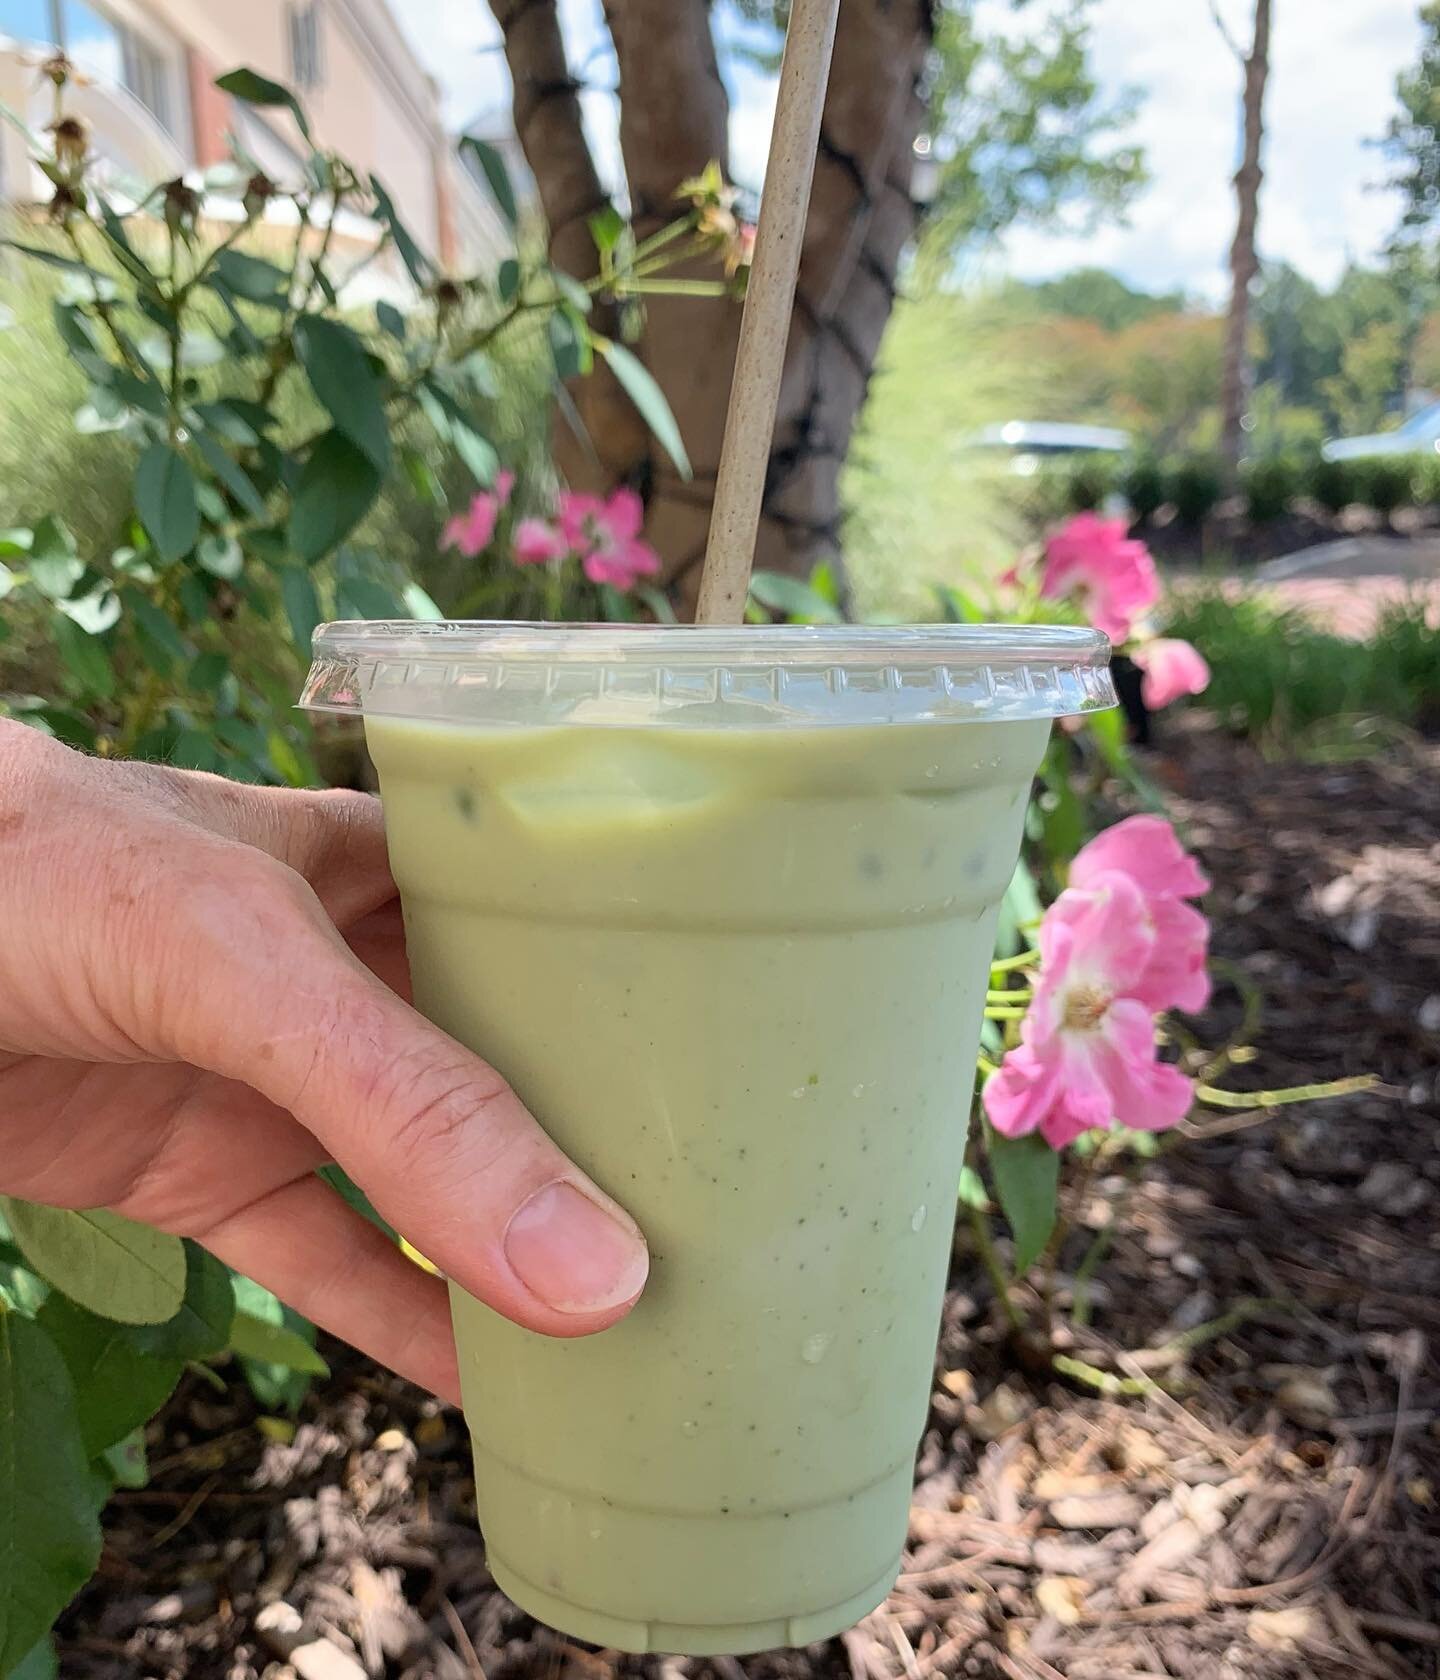 Come grab an Iced Matcha Latte to cool down 🌱
Perfectly refreshing with substitute milks, like Almond or Oat 🌸
.
.
.
#cafe #matcha #latte #drink #drinks